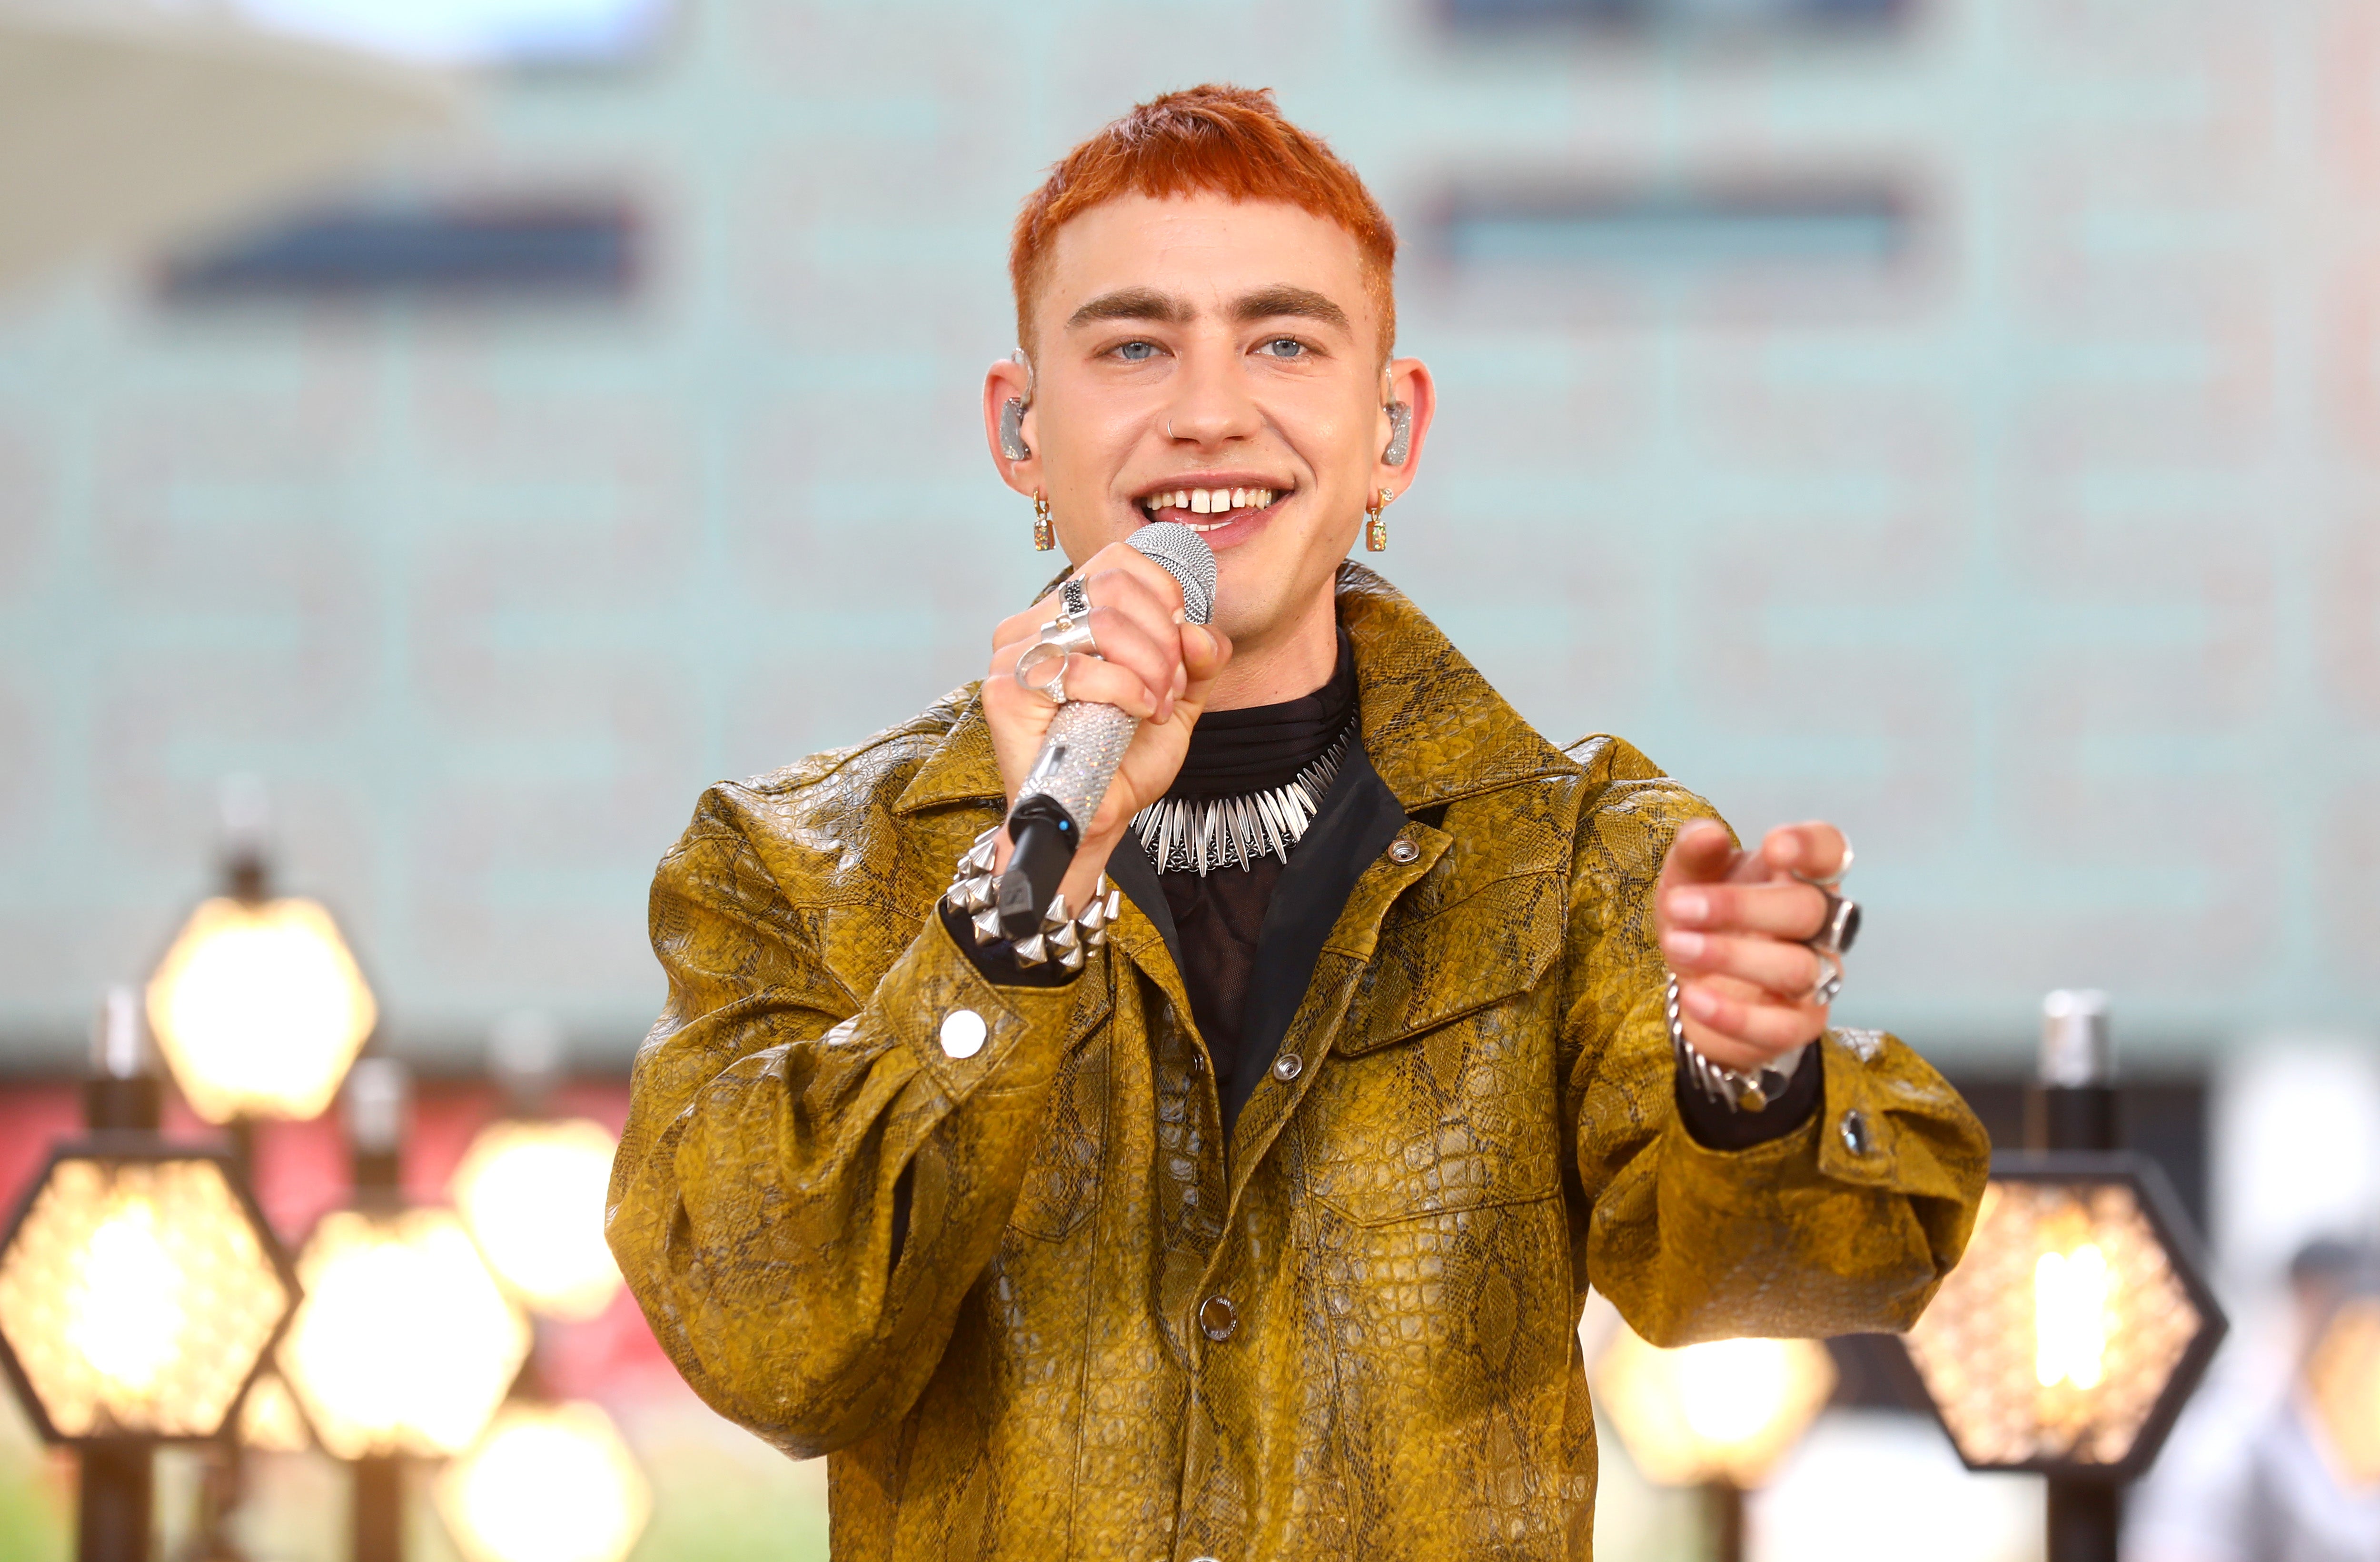 Olly Alexander has said he’s ‘just so excited’ to represent UK in singing contesr